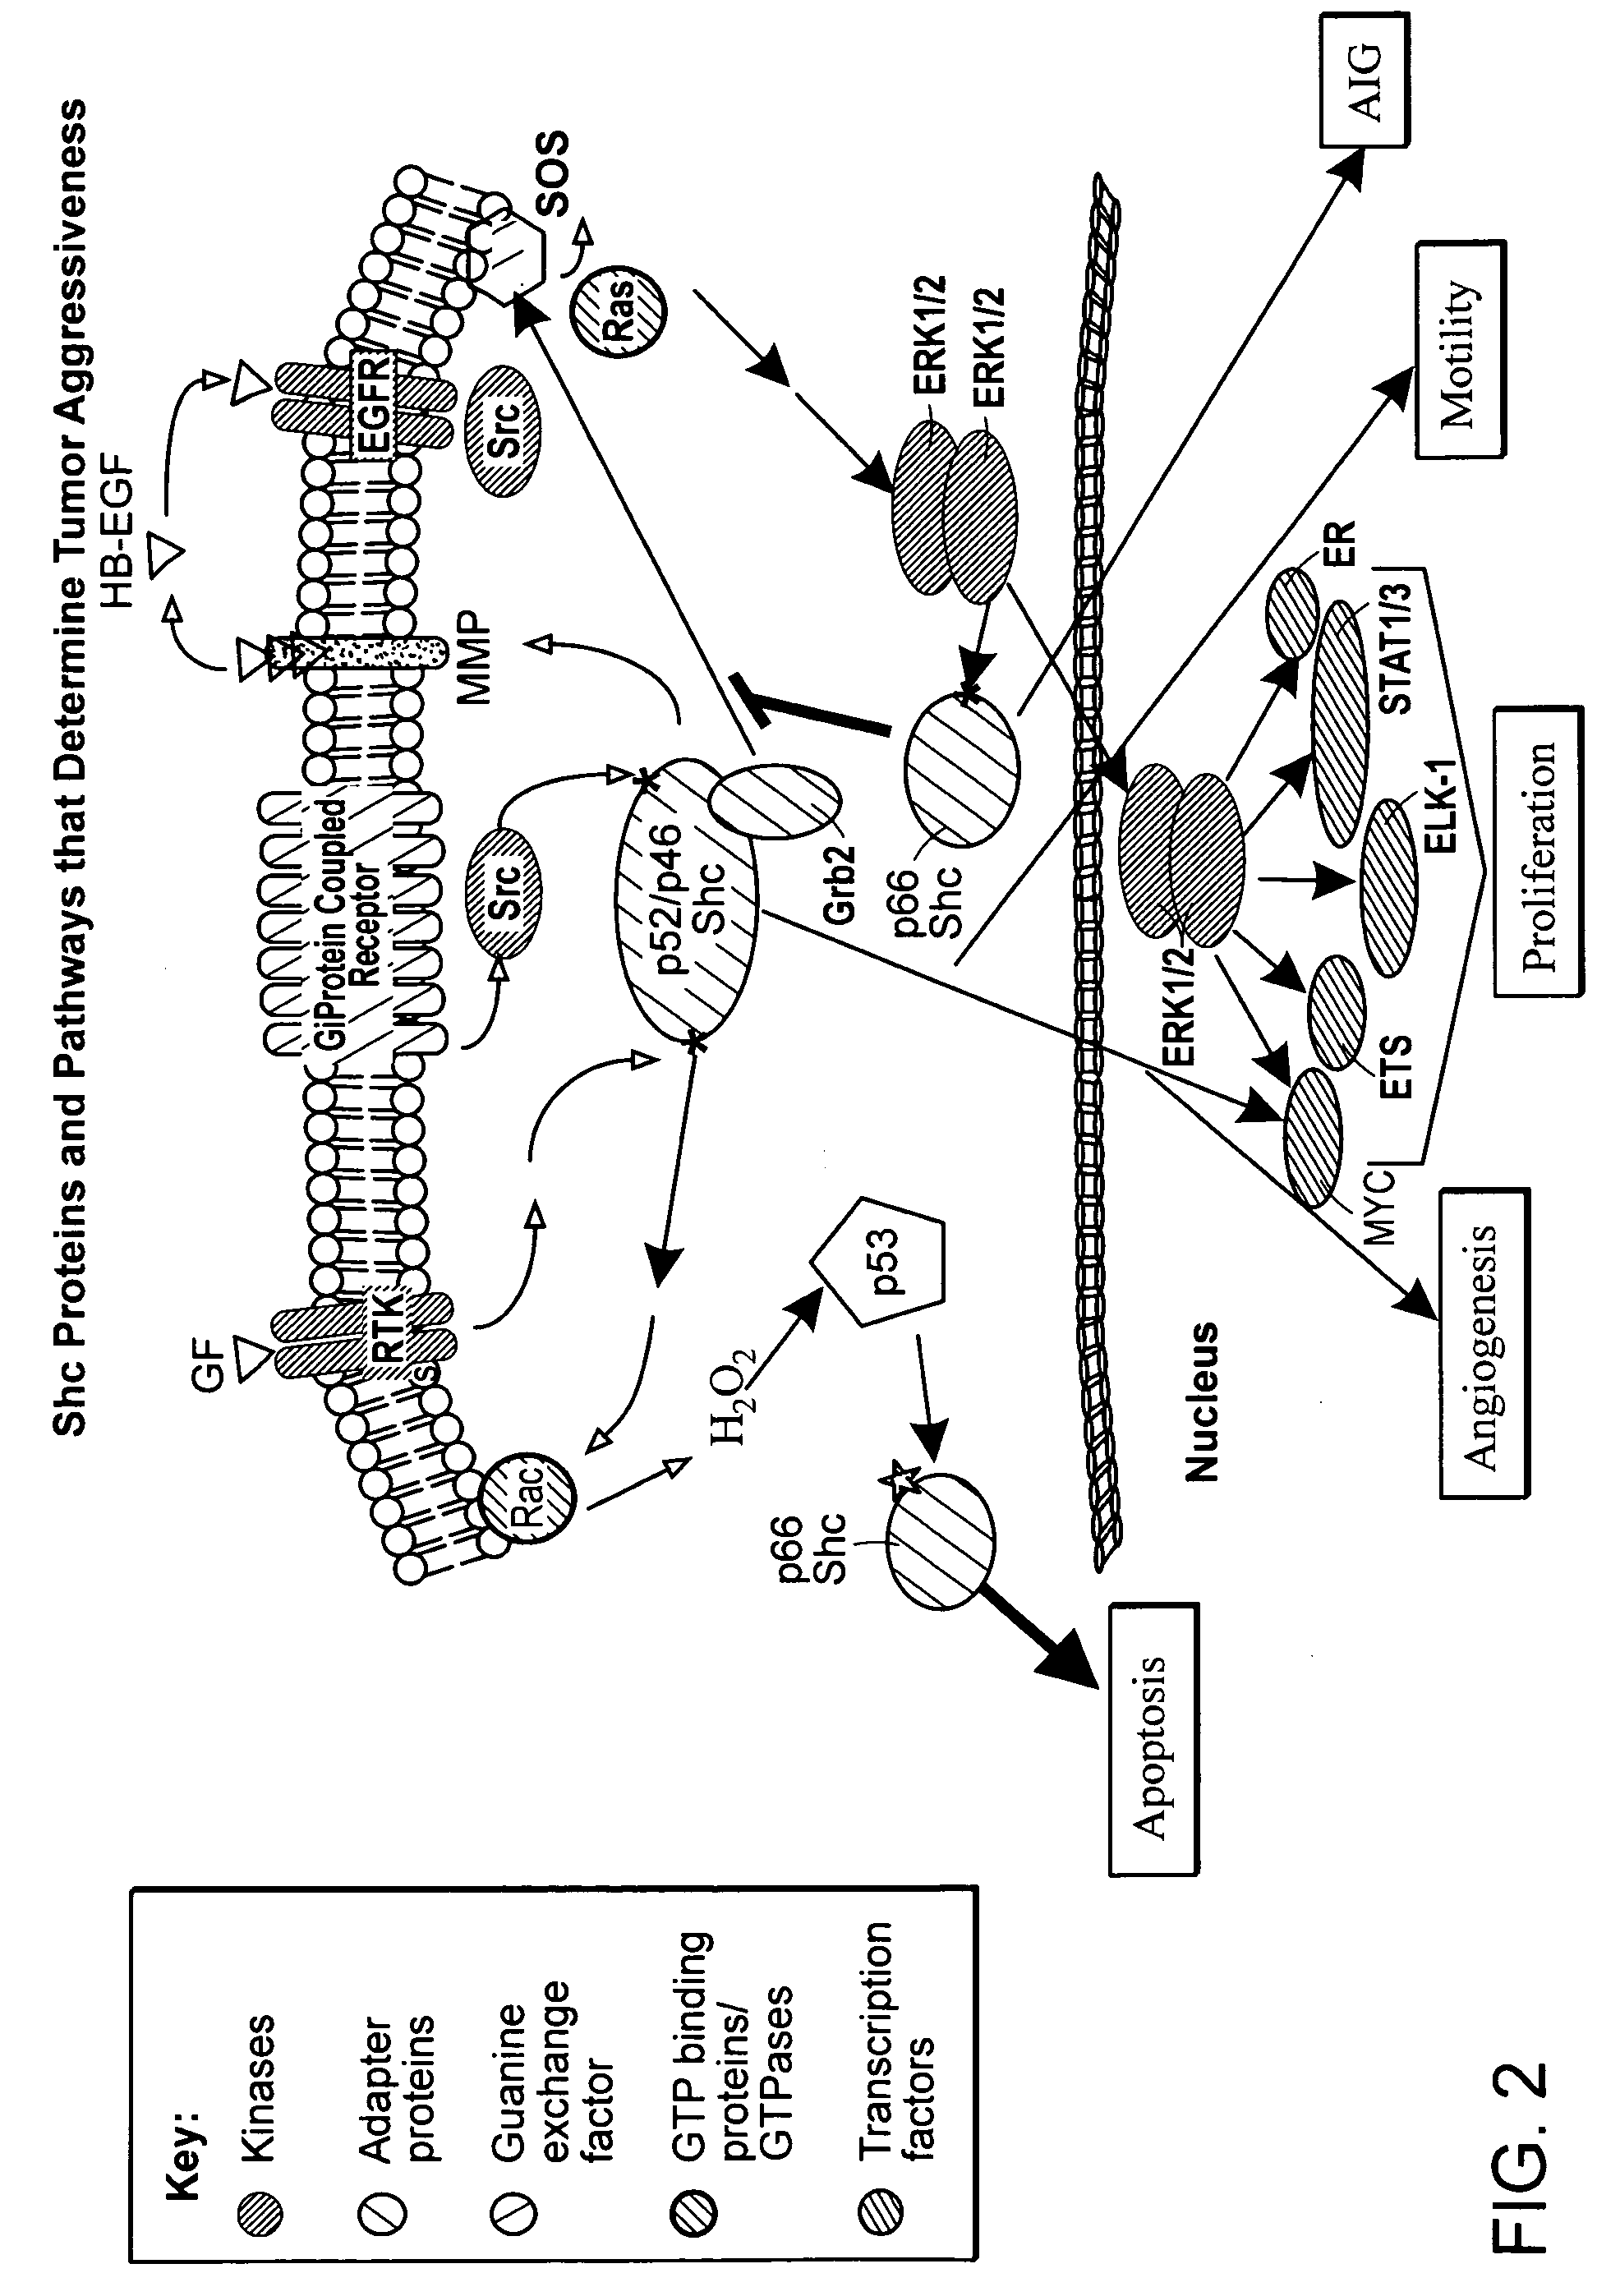 SHC protein-related methods and compositions